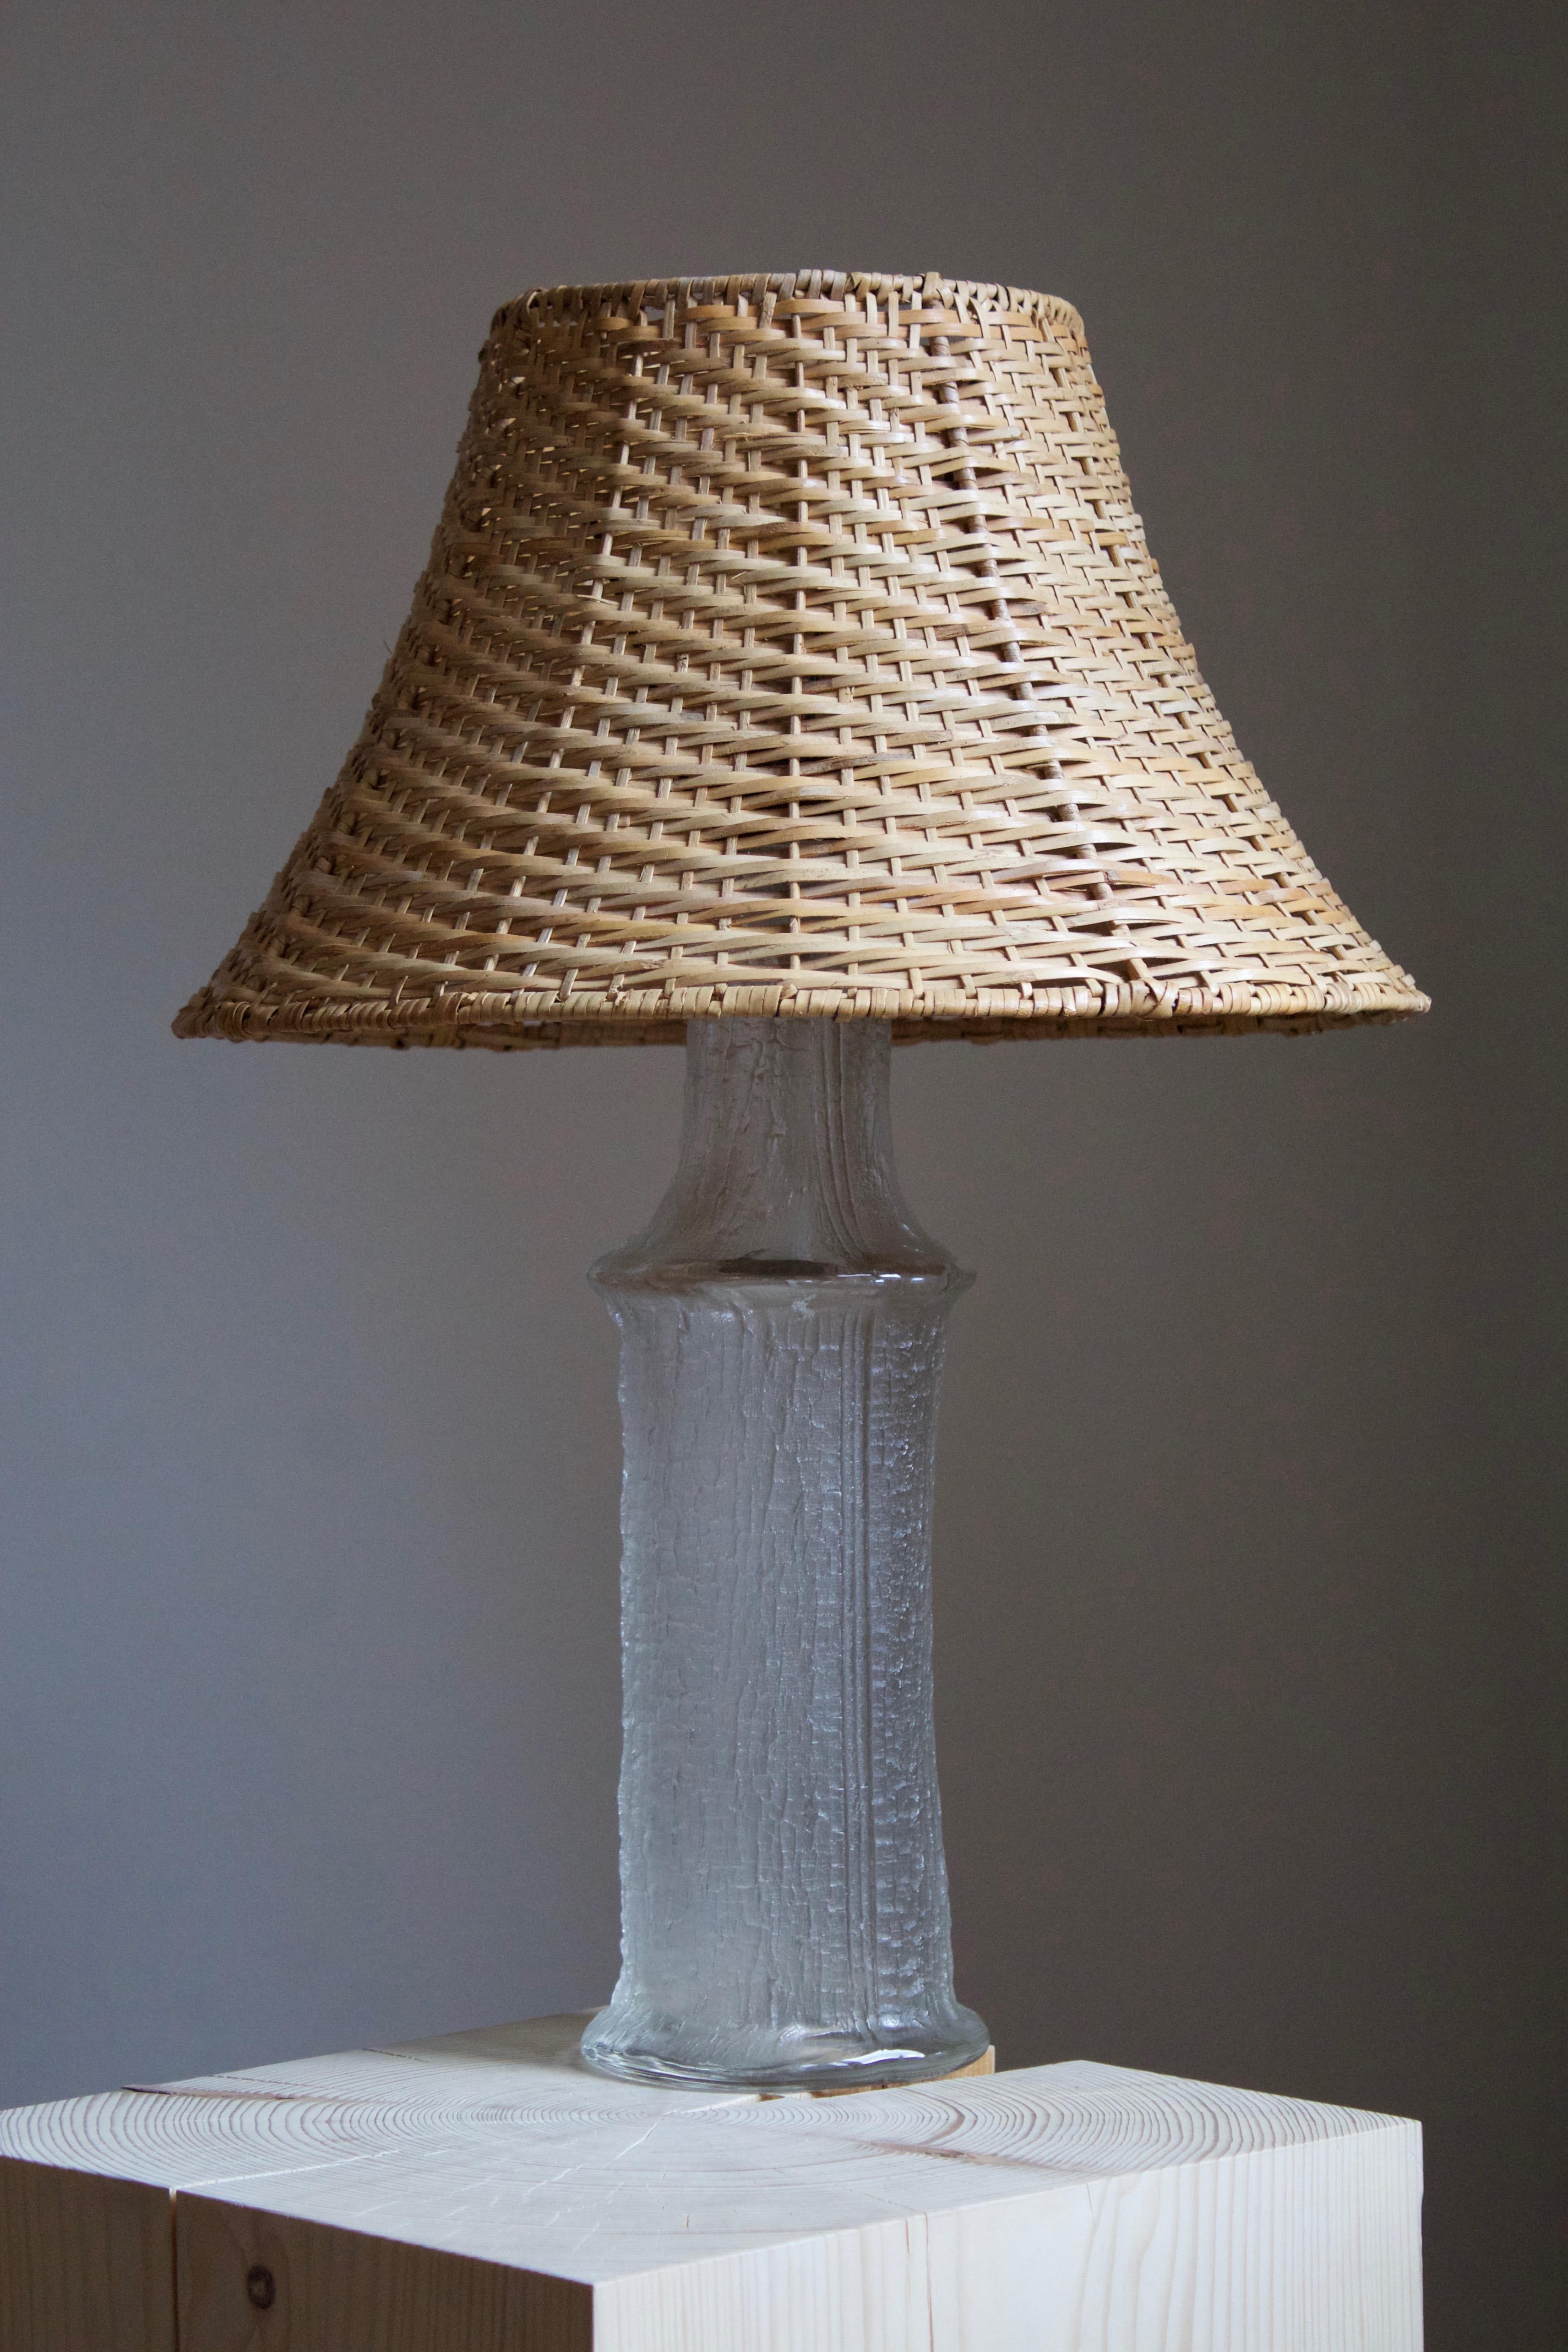 A table lamp, designed by Timo Sarpaneva. Glass produced by Finnish glass maker Ittala for Swedish firm Lilux Belysning Ab. With an assorted vintage rattan lampshade.